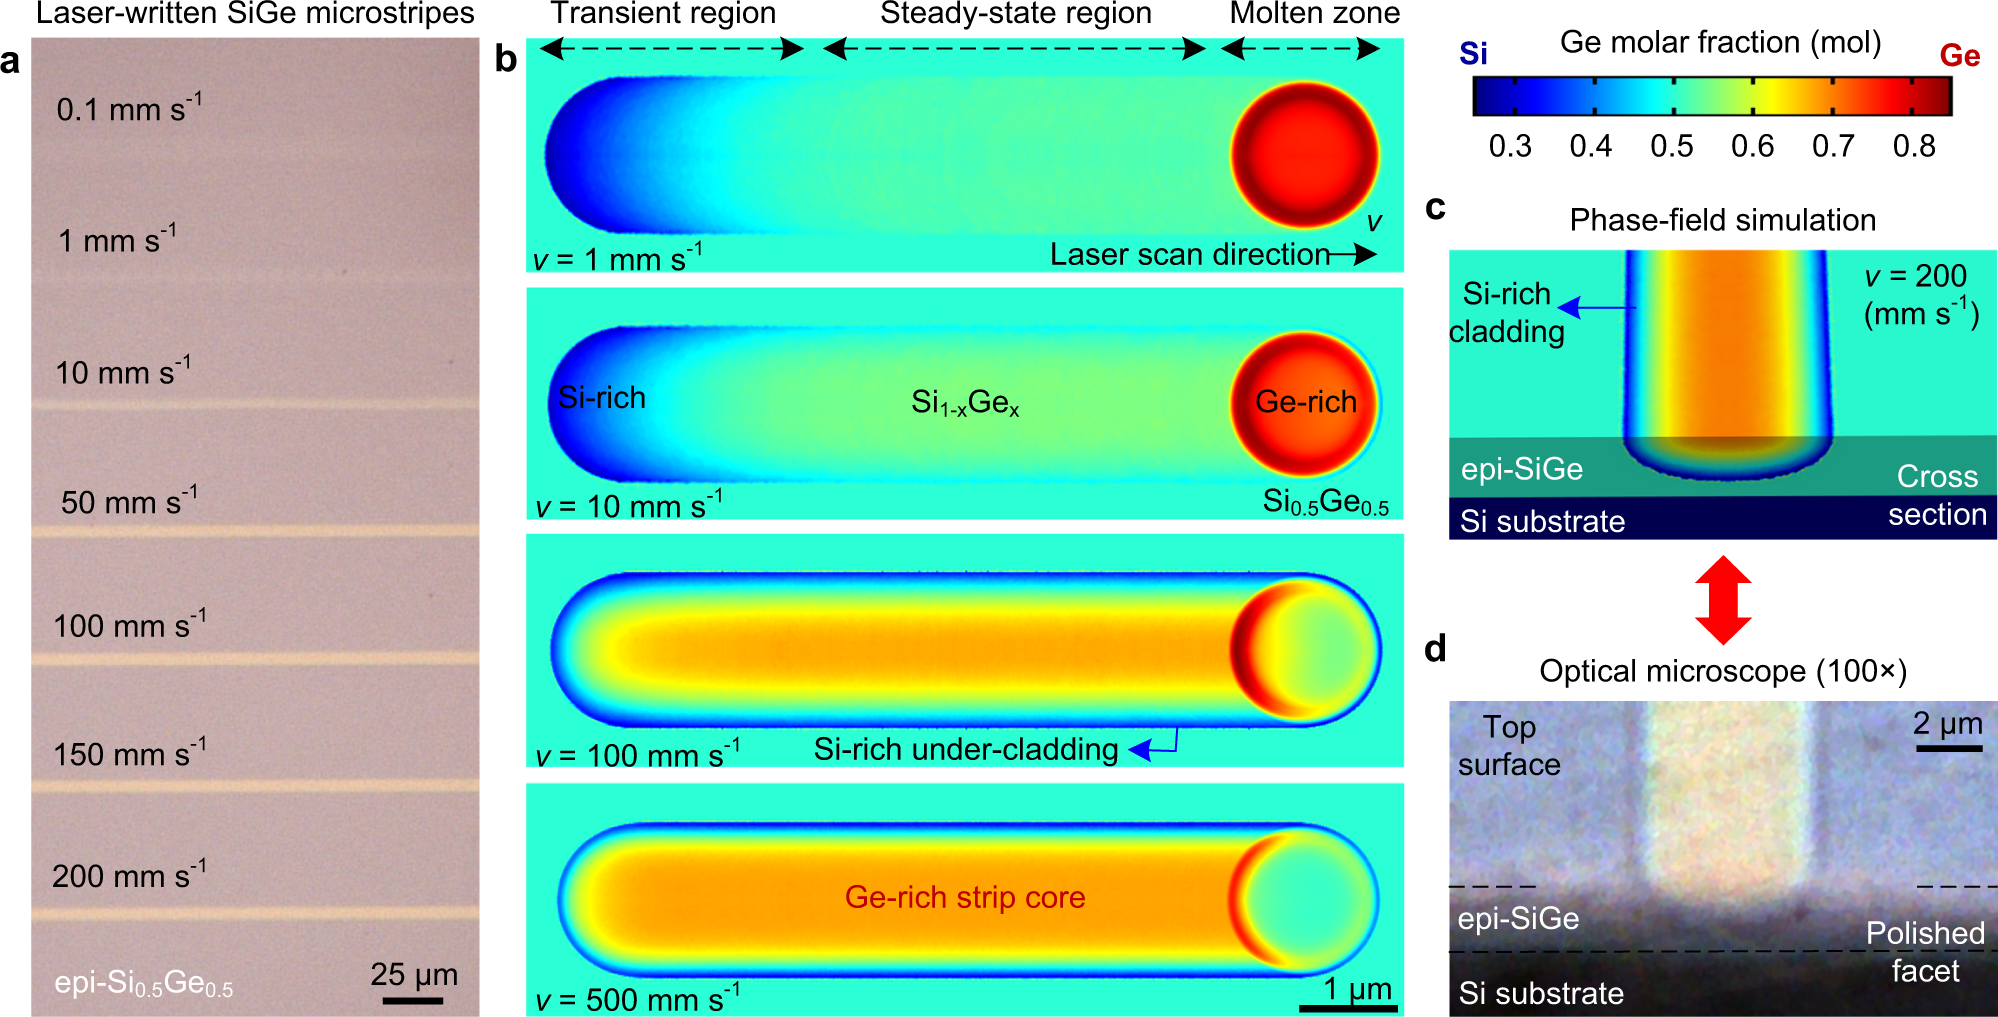 Non-isothermal phase-field simulations of laser-written in-plane SiGe  heterostructures for photonic applications | Communications Physics